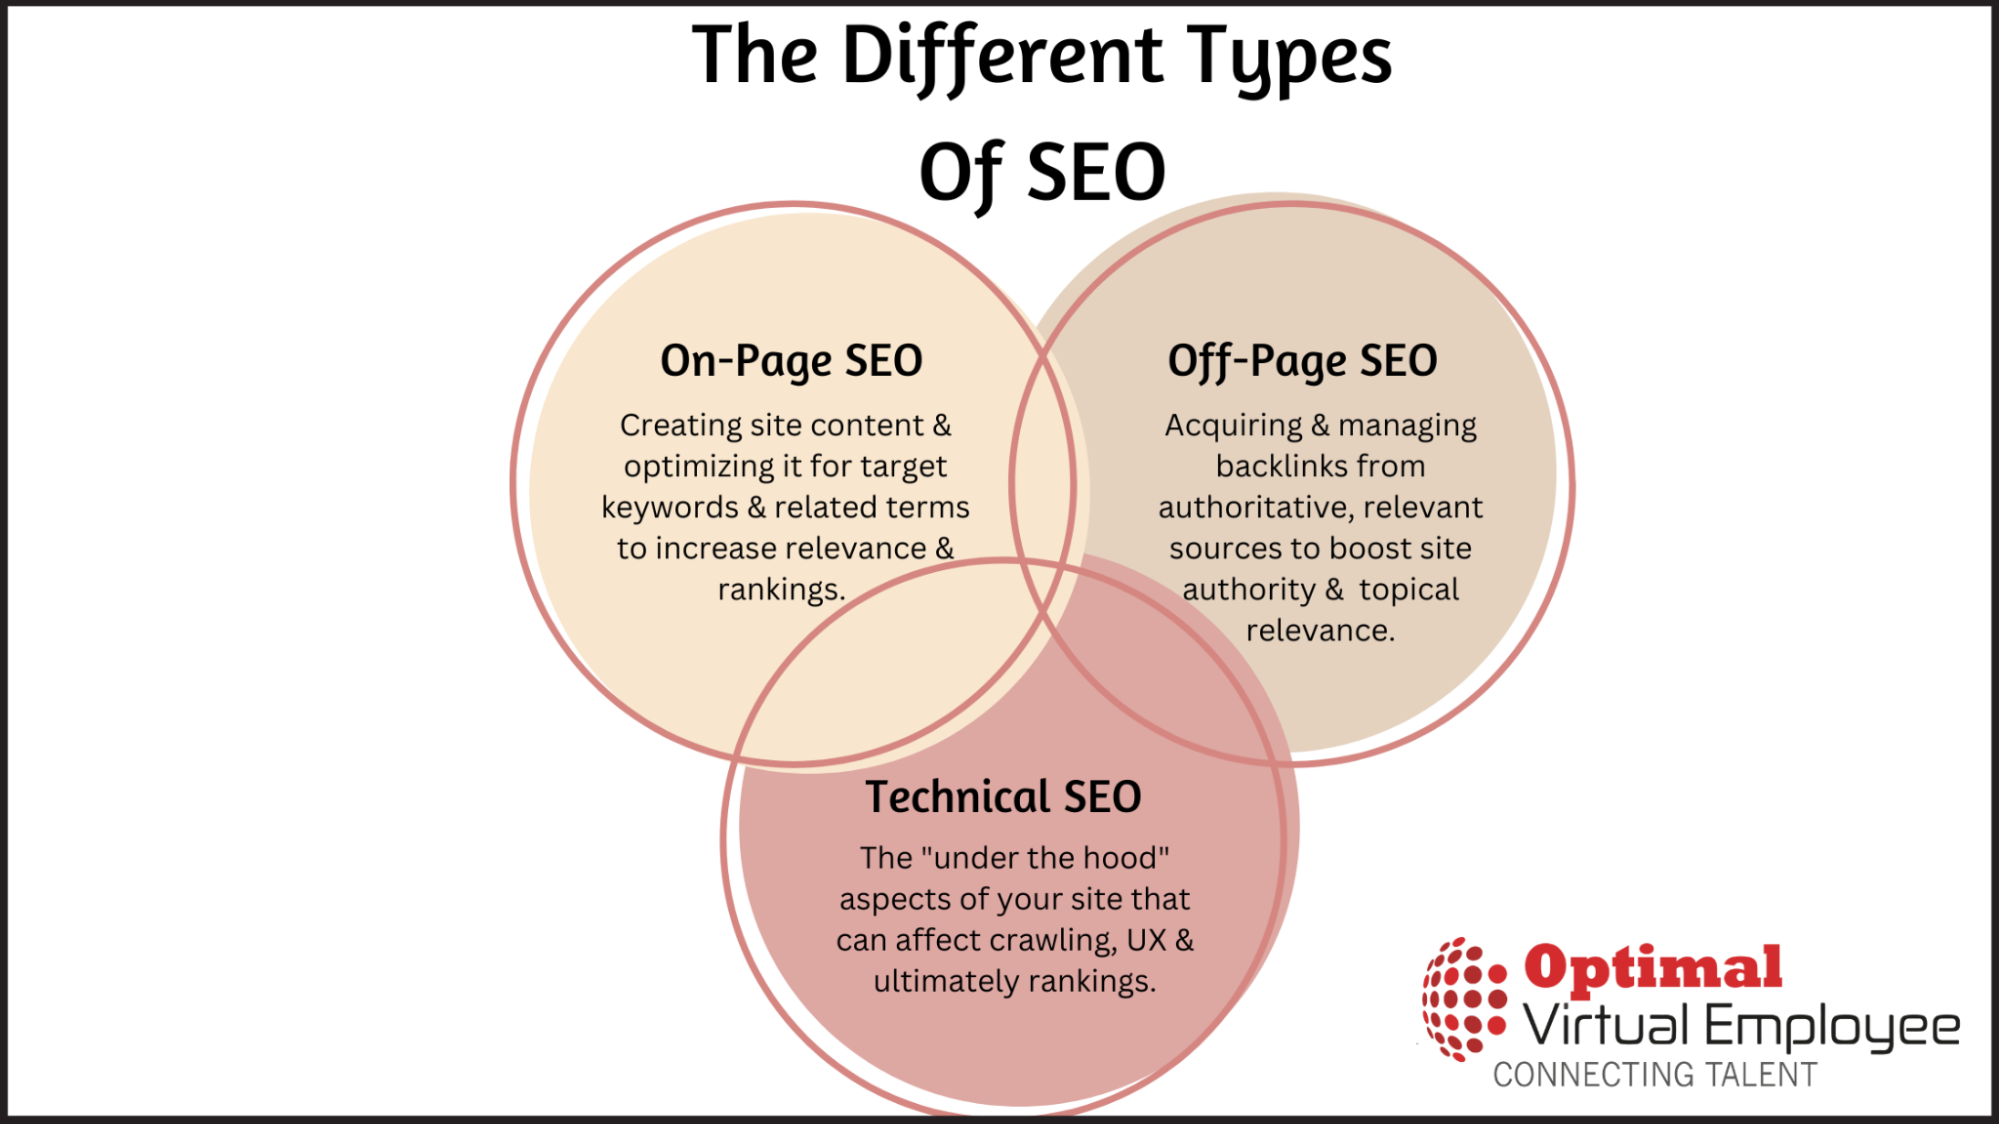 The Different Types Of SEO